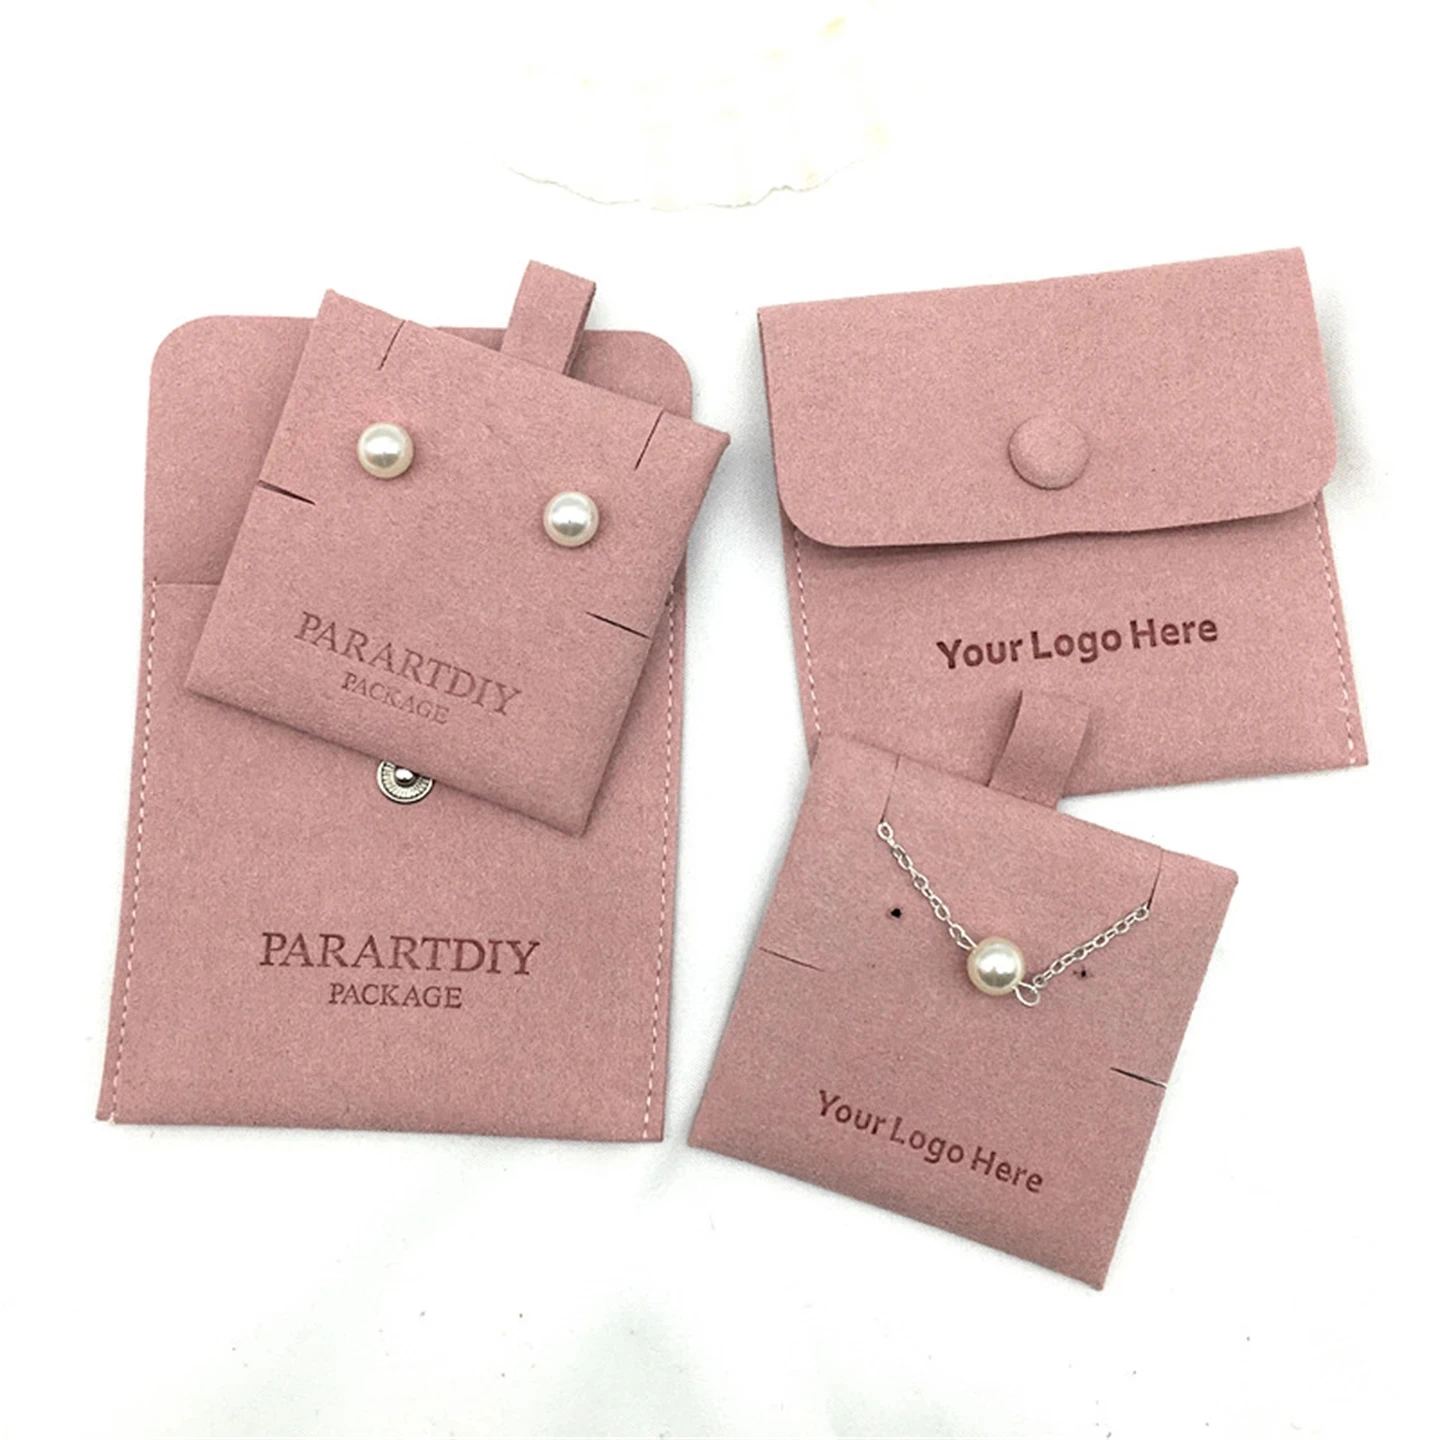 50 Sets Of Pink Jewelry Bag, Microfiber Bag, Personalized With Insert Card, Earrings, Necklace Bag, Customized Logo Tool Kit